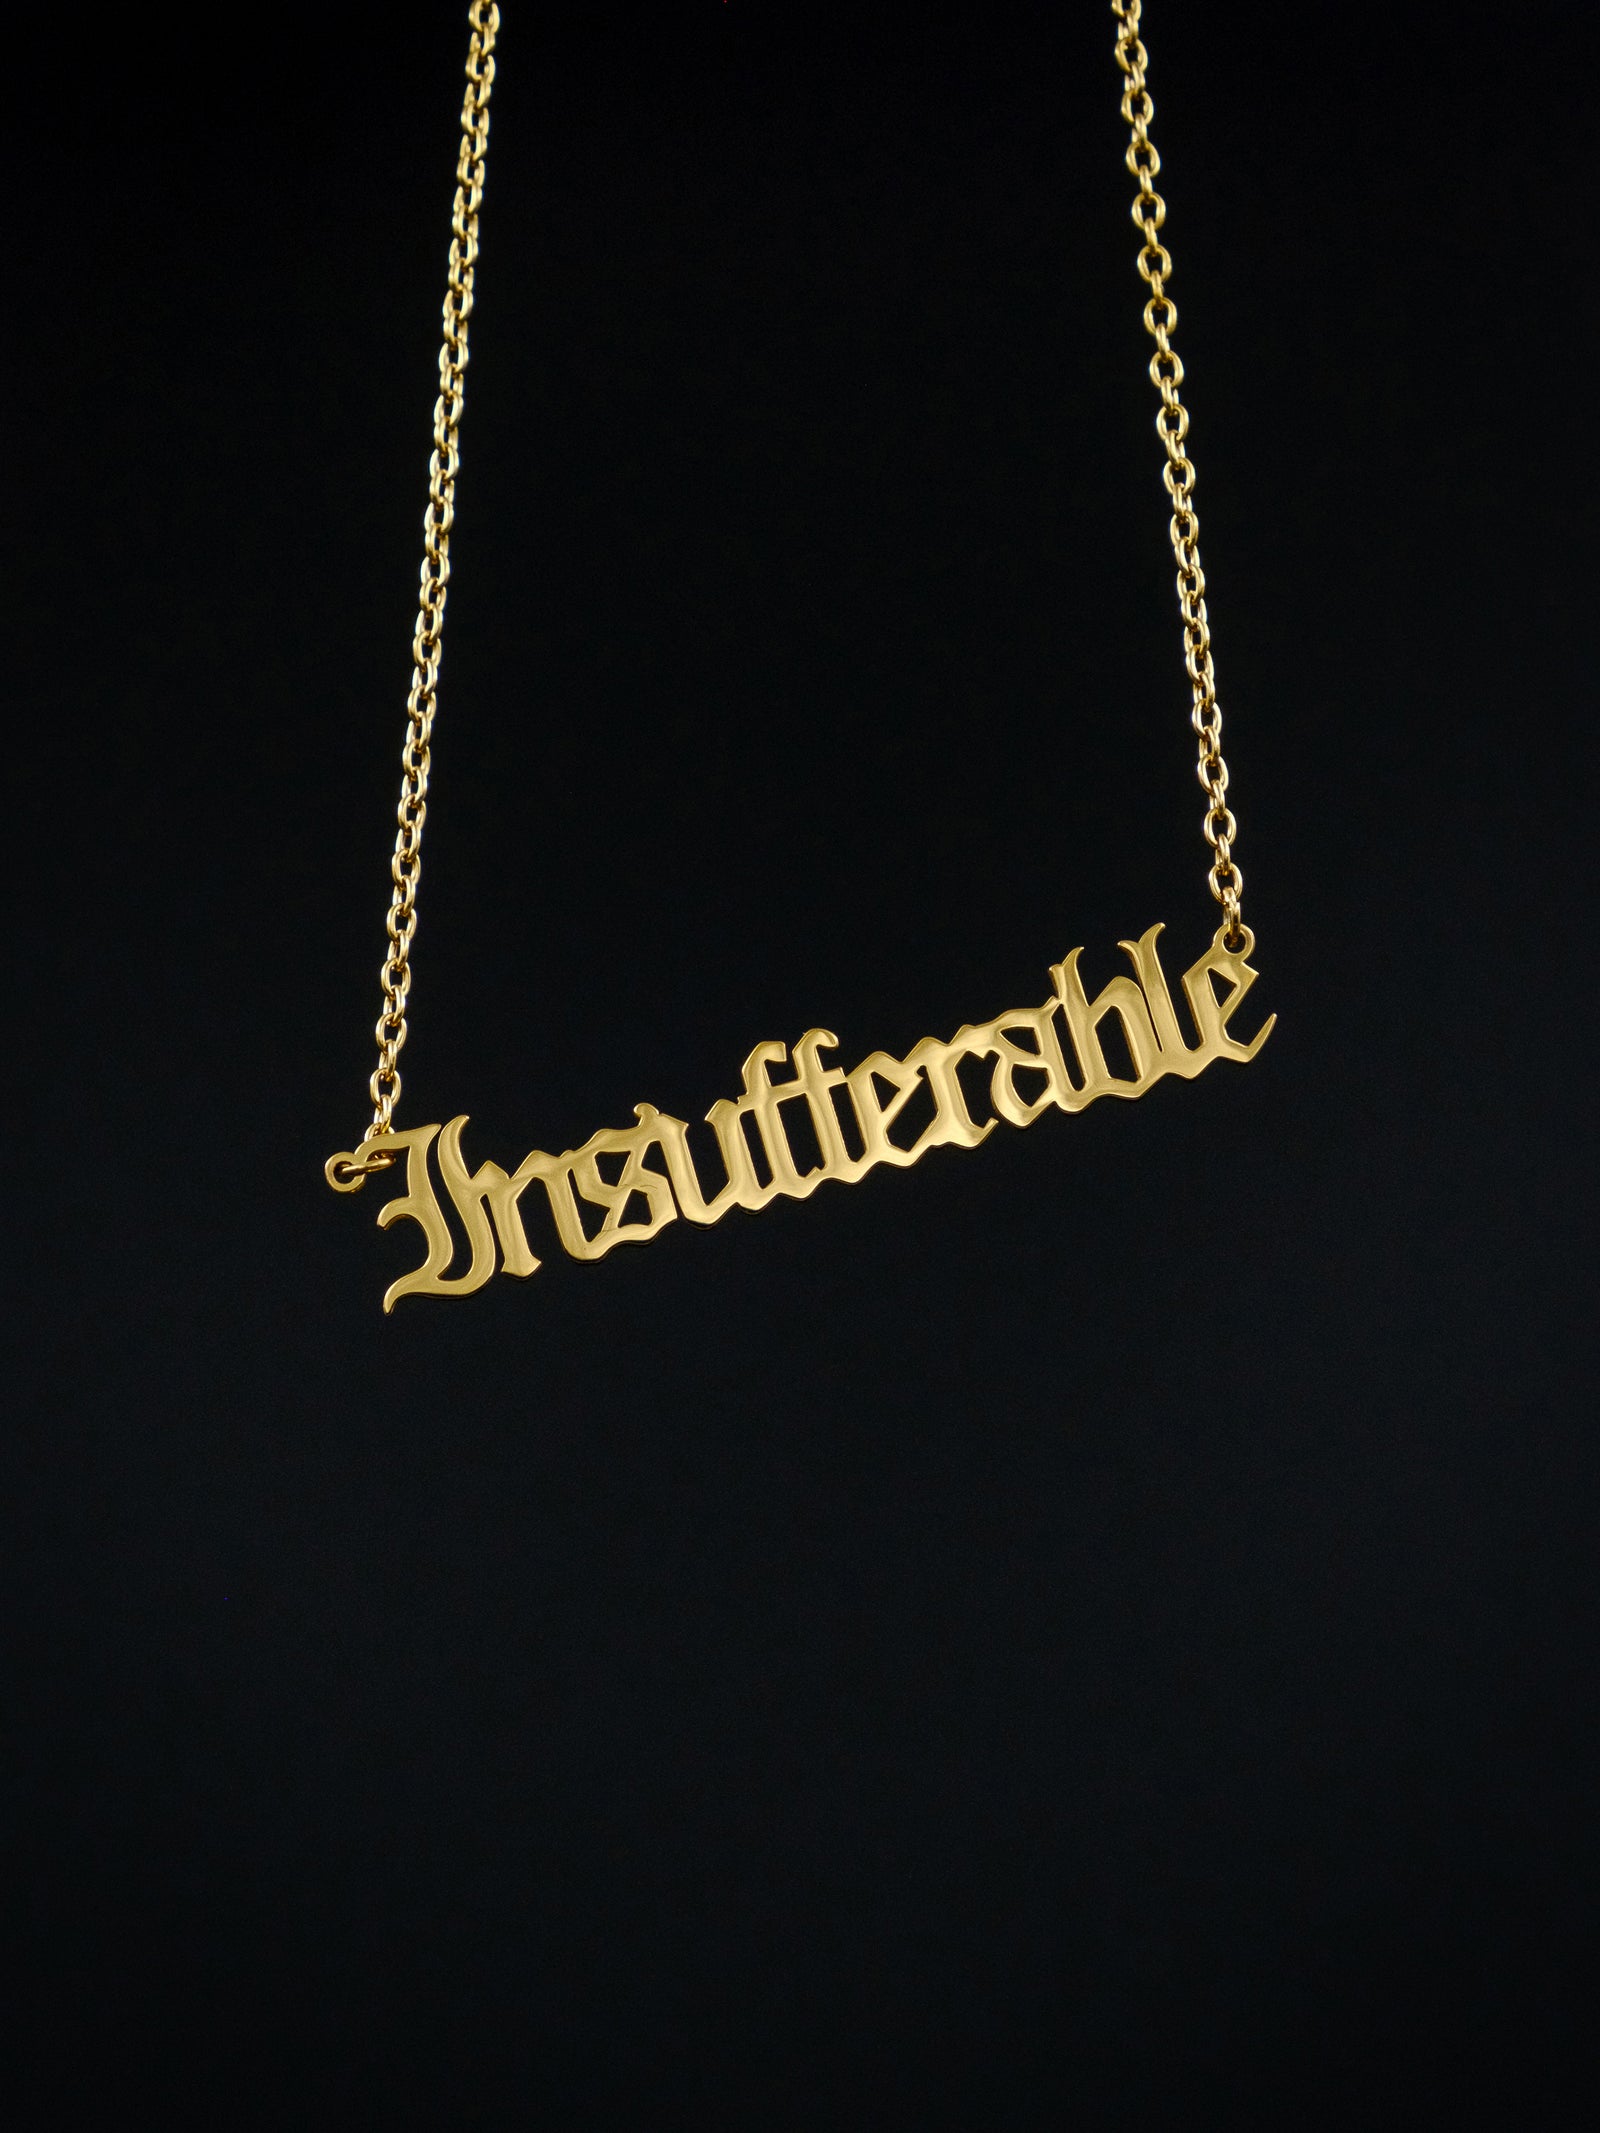 gold nameplate style necklace against a black background reads "insufferable" in old english style font